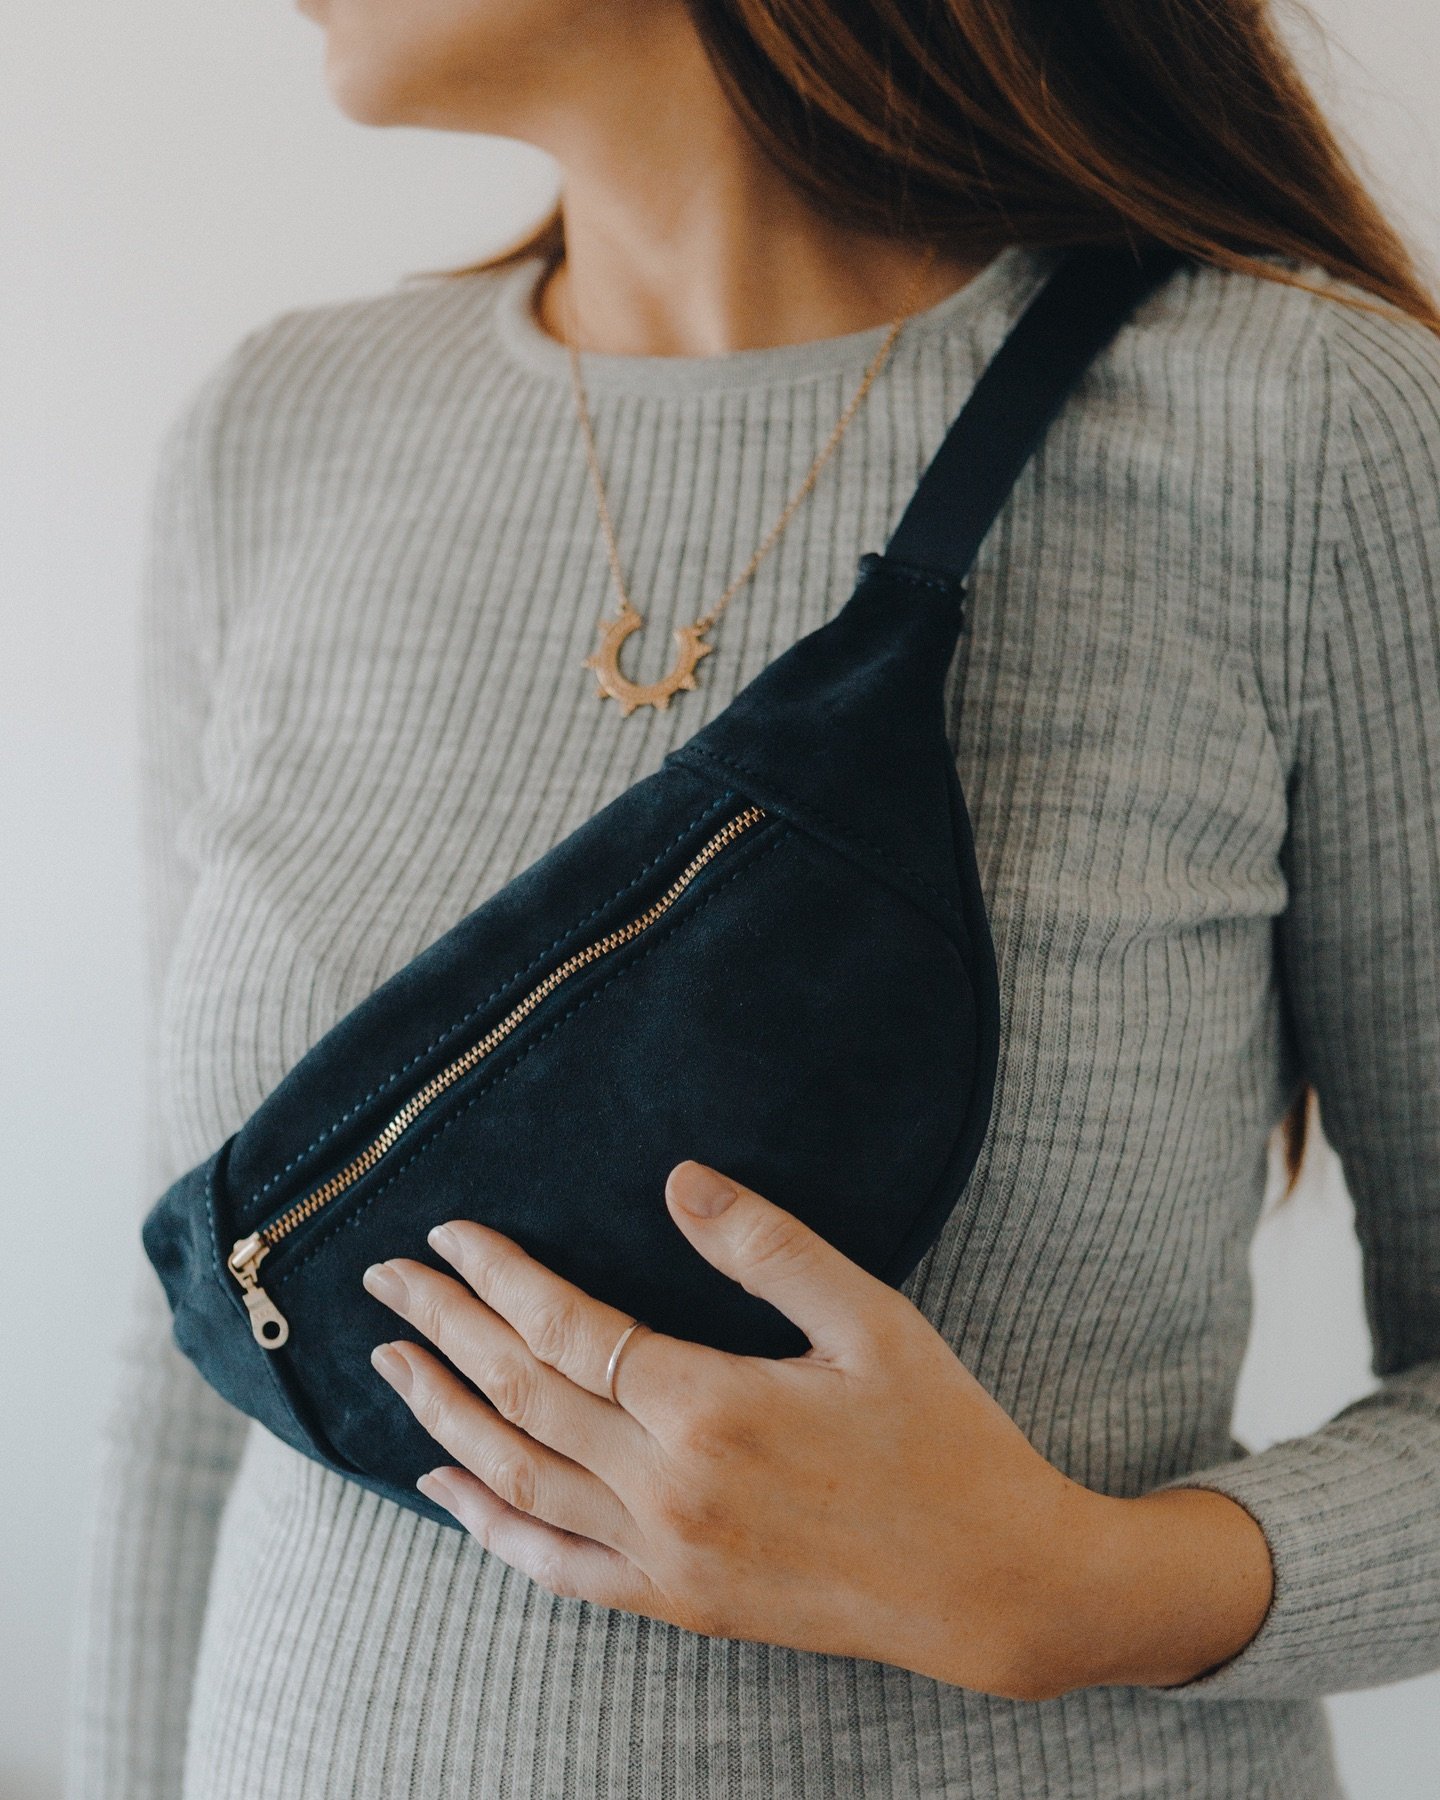 P R E O R D E R  E N D S  F R I D A Y

This very limited edition sling bag, in gorgeous dusk blue suede from @billytannery is available to pre order, but you&rsquo;ve got to be quick, because the preorder closes Friday 12th April. 

So if you are loo